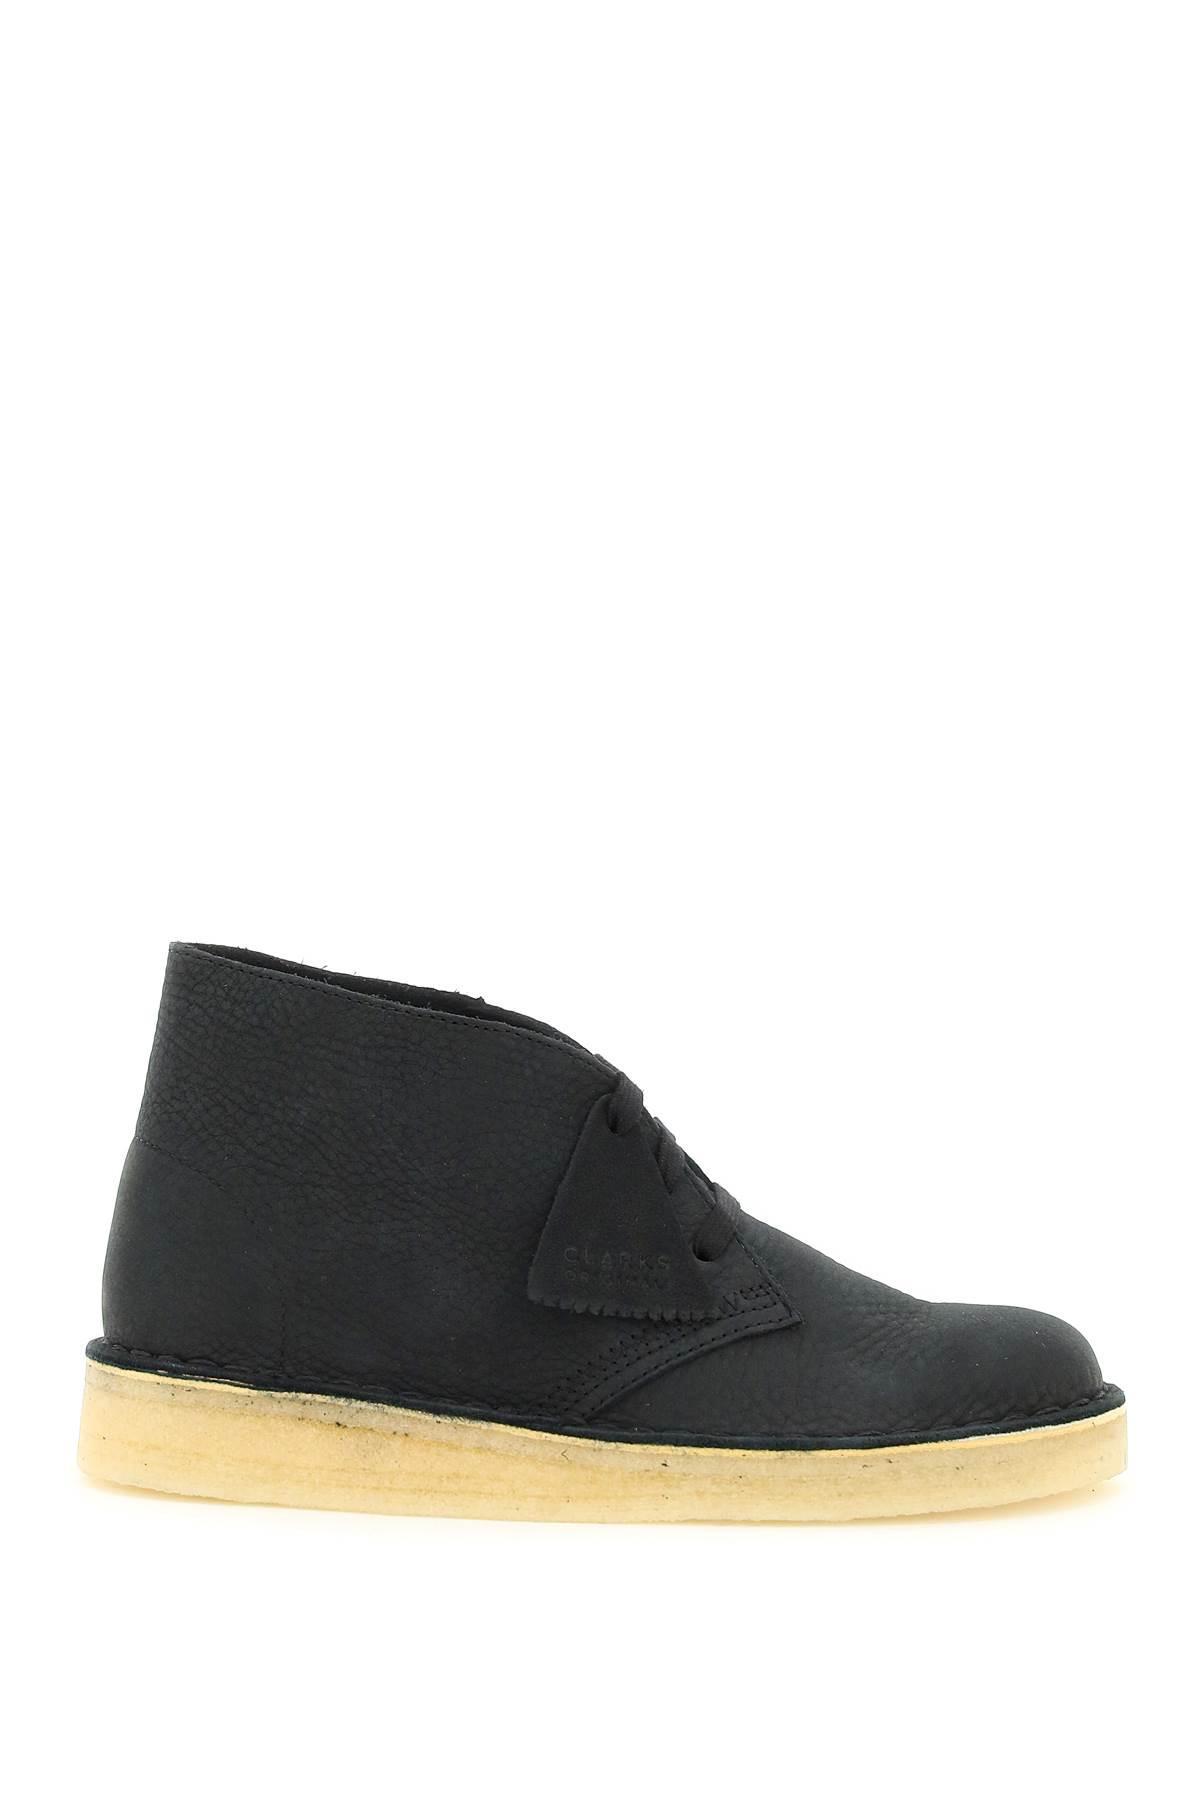 Clarks Desert Coal Lace-up Shoes in Black | Lyst